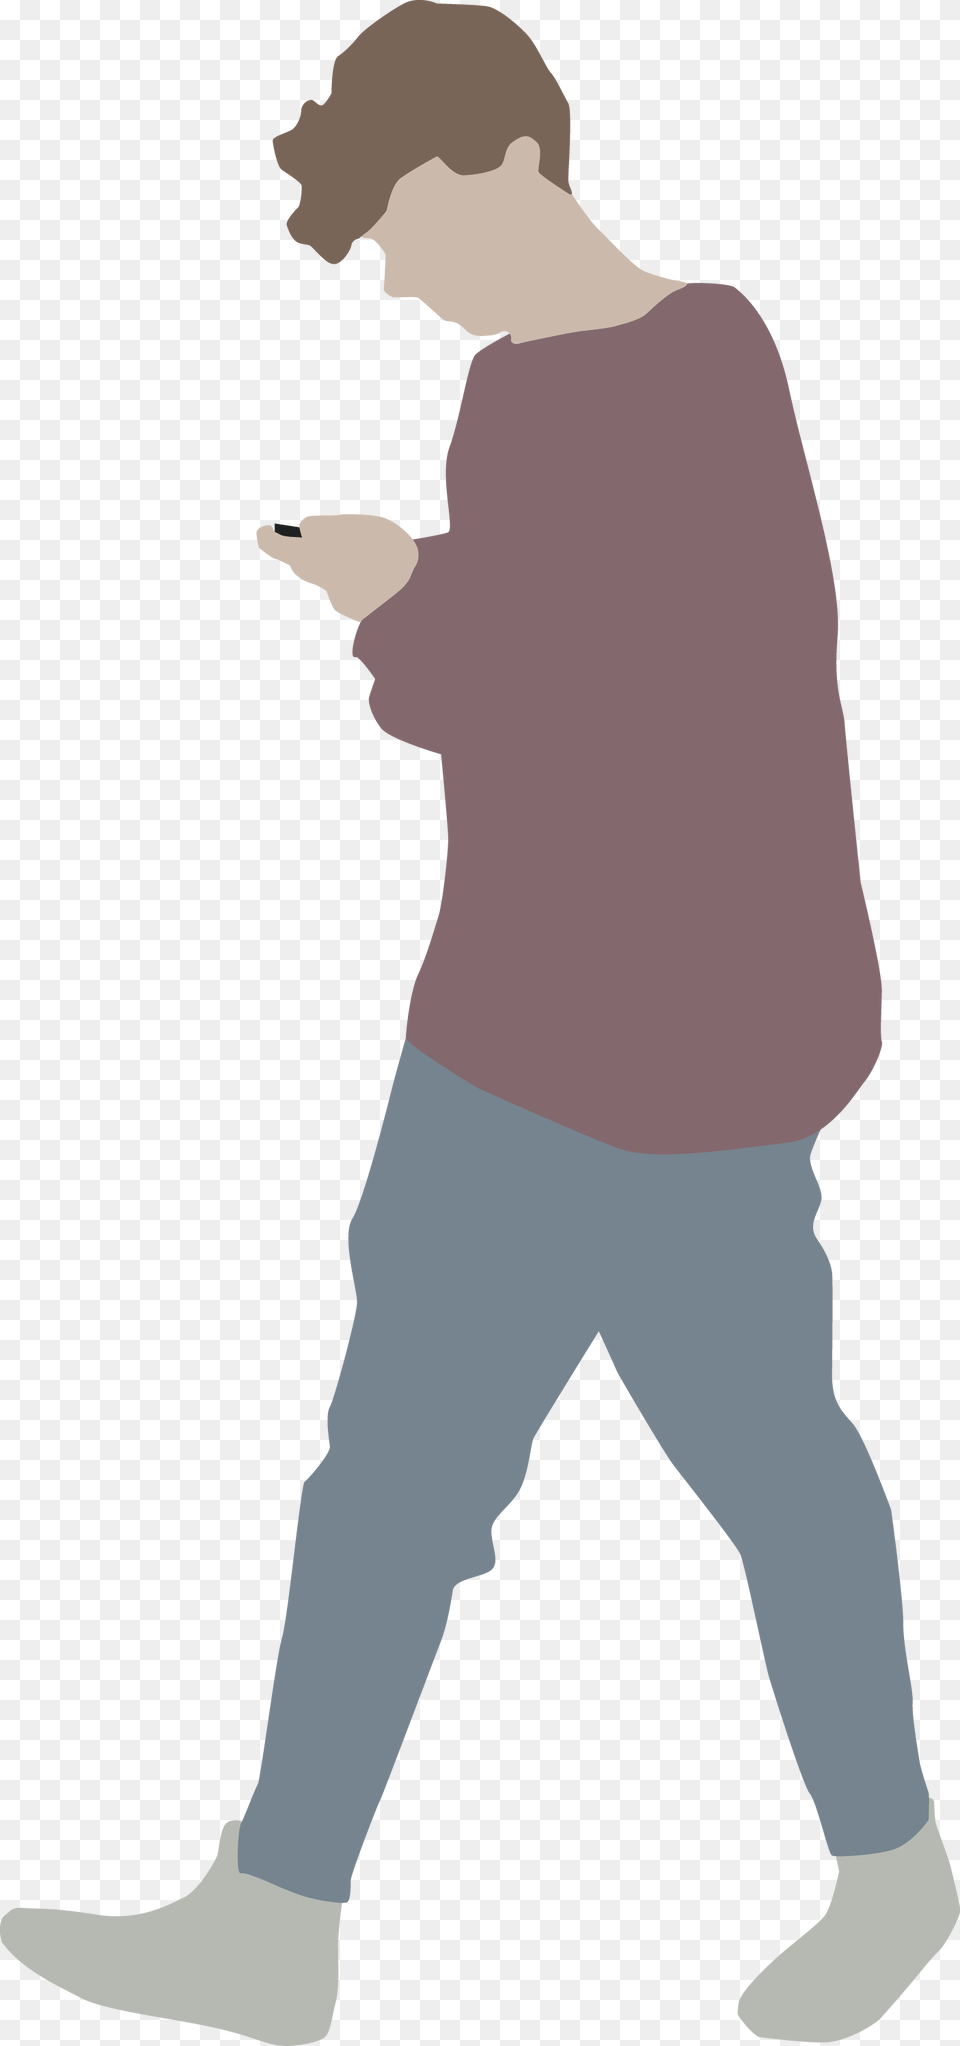 Undefined People Cut Out People People Cutout Human Figure Architecture, Walking, Clothing, Person, Pants Png